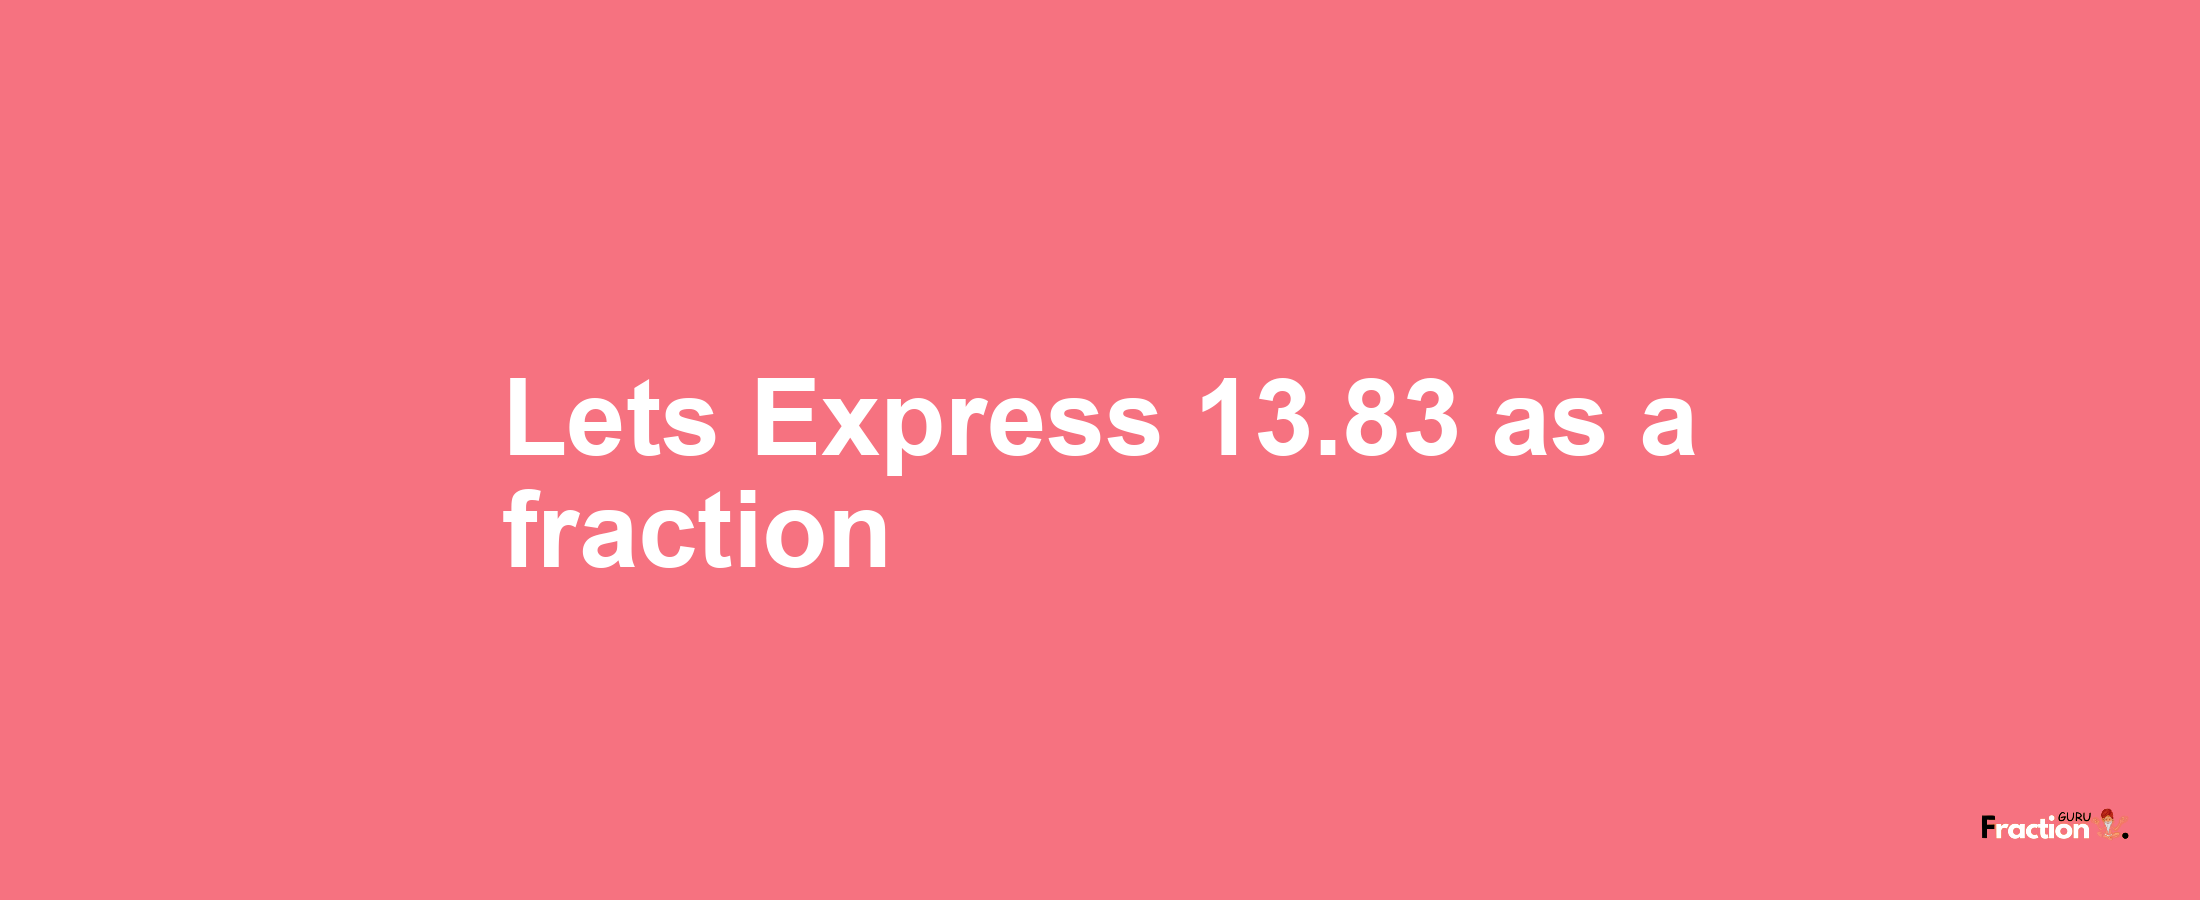 Lets Express 13.83 as afraction